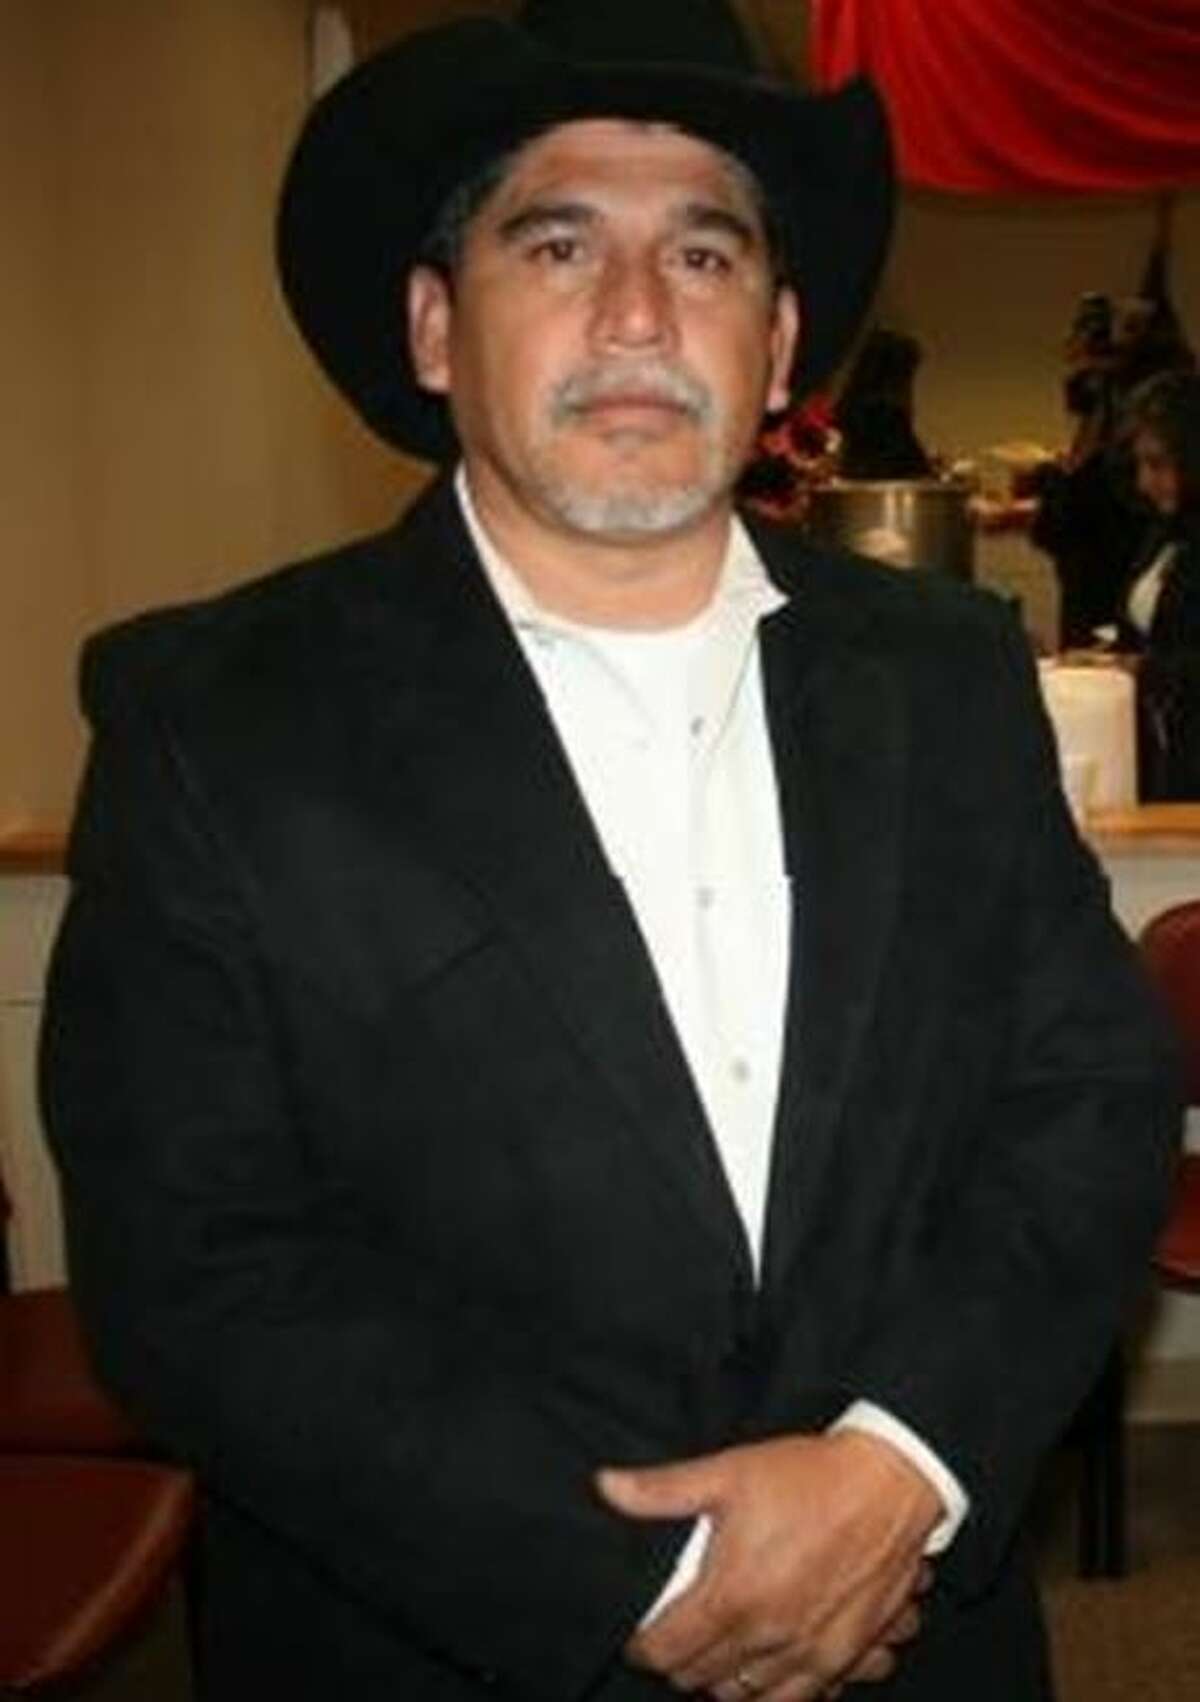 Relatives of former Webb County Precinct 2, Place 2 Justice of the Peace Ricardo Rangel continued to ask the community for prayers as he remained in critical condition.